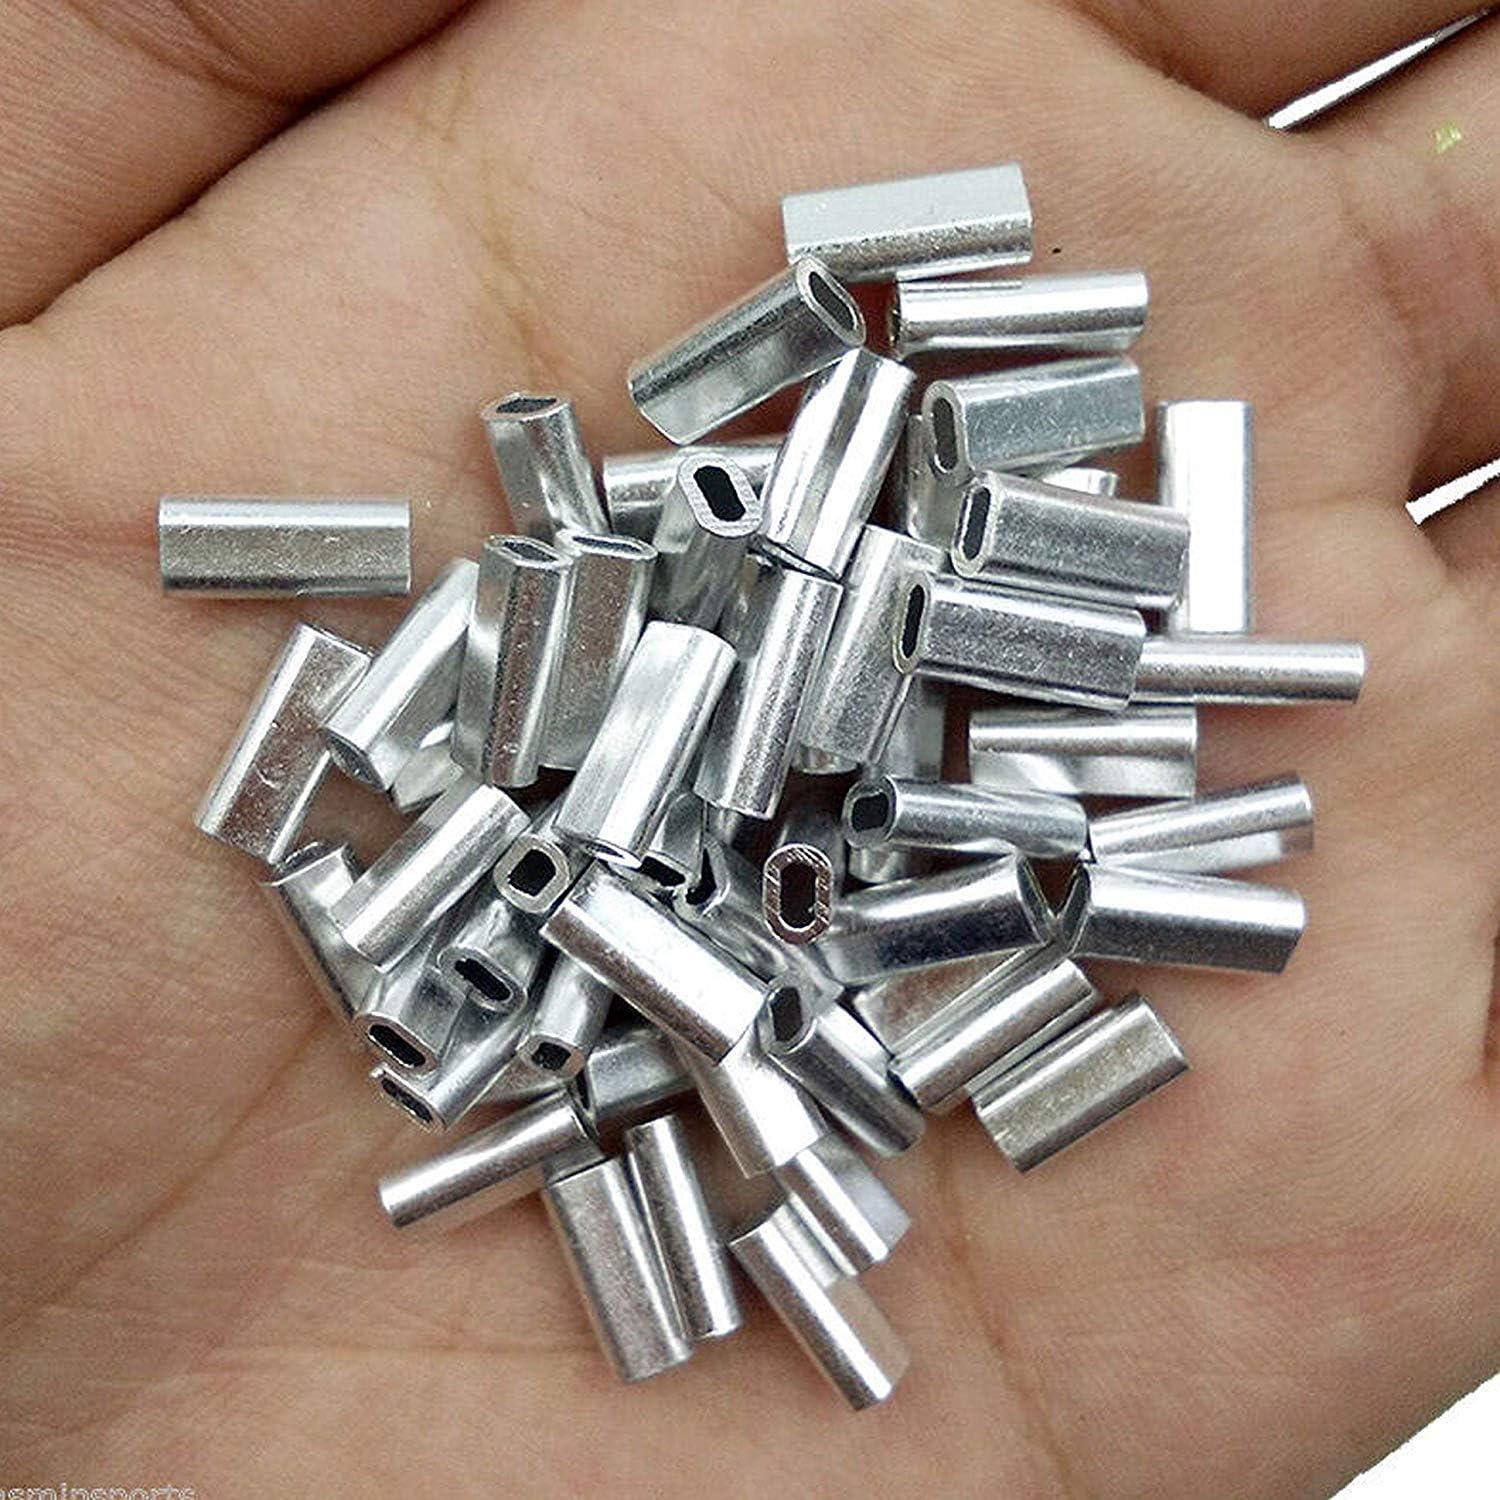 AGOOL Aluminum Single Barrel Crimp Sleeves Kit -500pcs Aluminum Crimping  Loop Sleeve Assortment Kit for Wire Rope and Cable Fishing Line Tube  Connectors for Leader Rigging Oval/Round